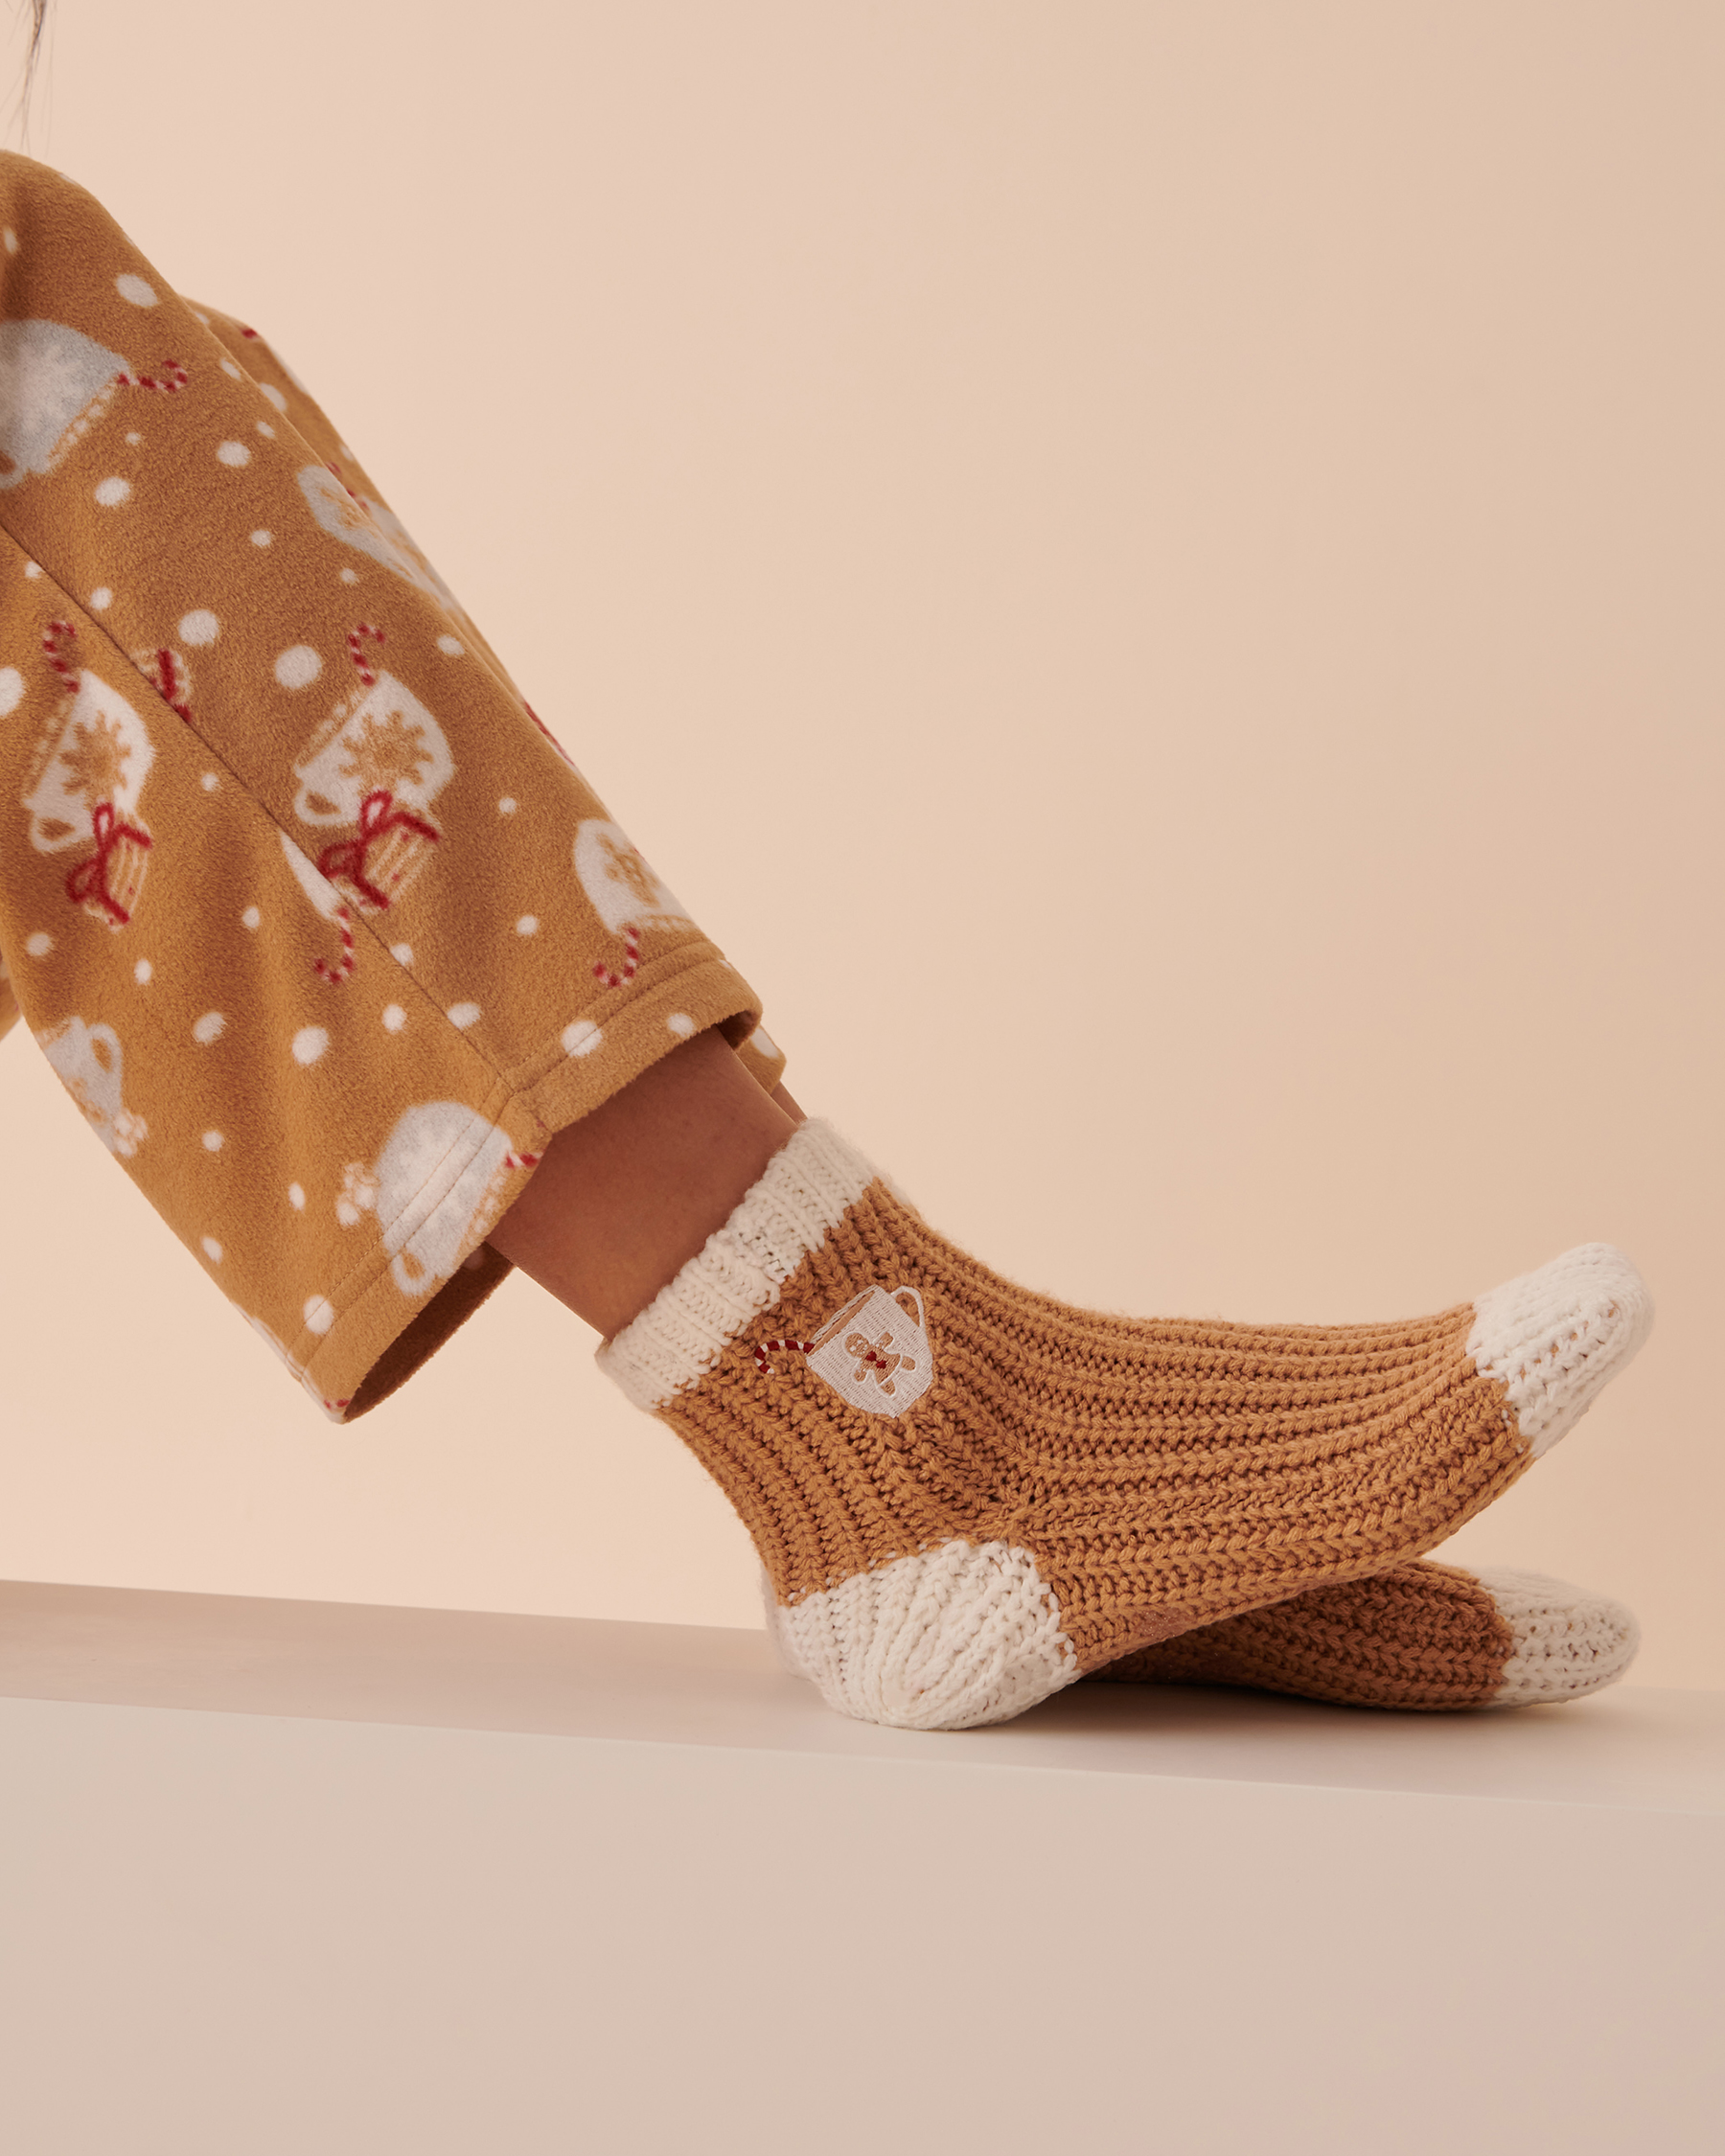 LA VIE EN ROSE Knitted Socks with Winter Embroidery Salted Caramel 40700295 - View1